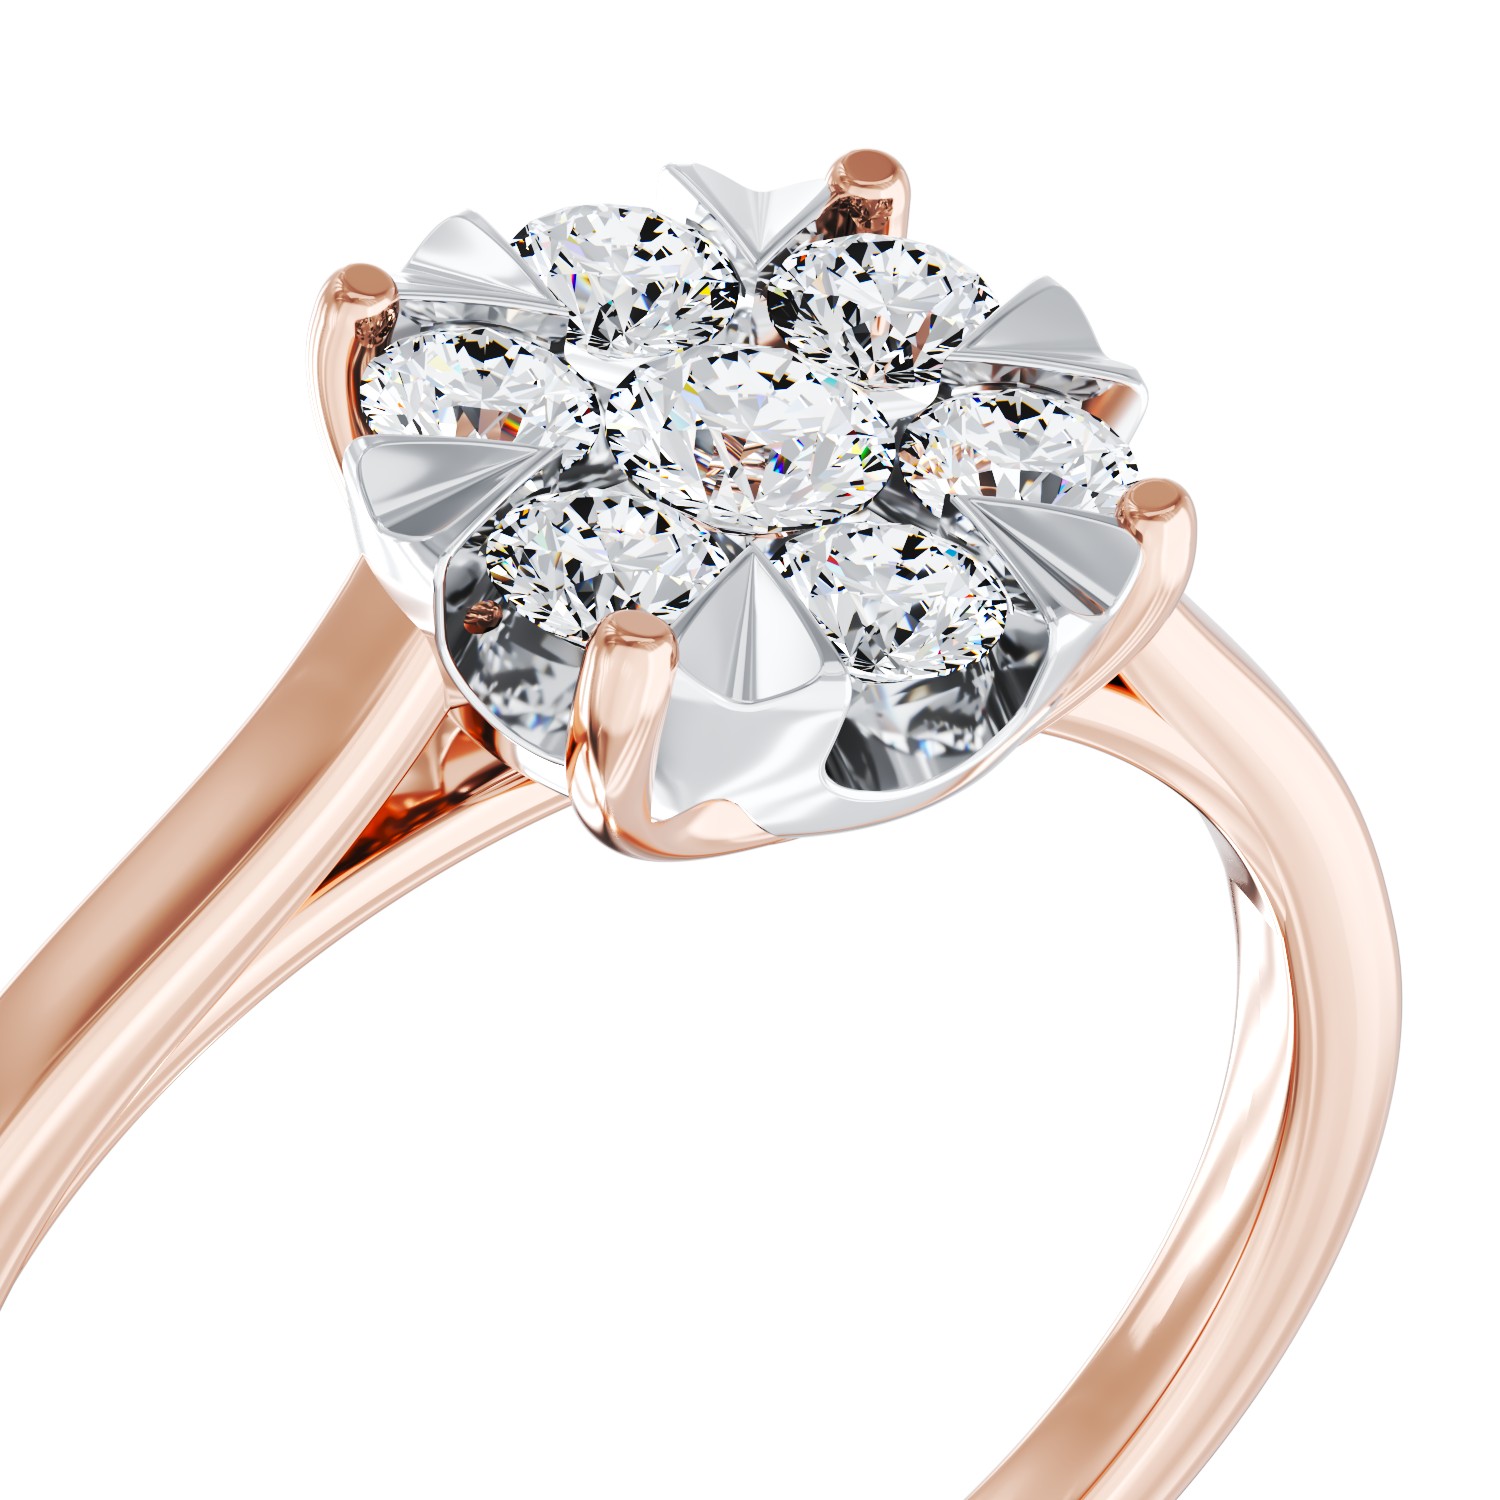 Rose gold engagement ring with 0.35ct diamonds